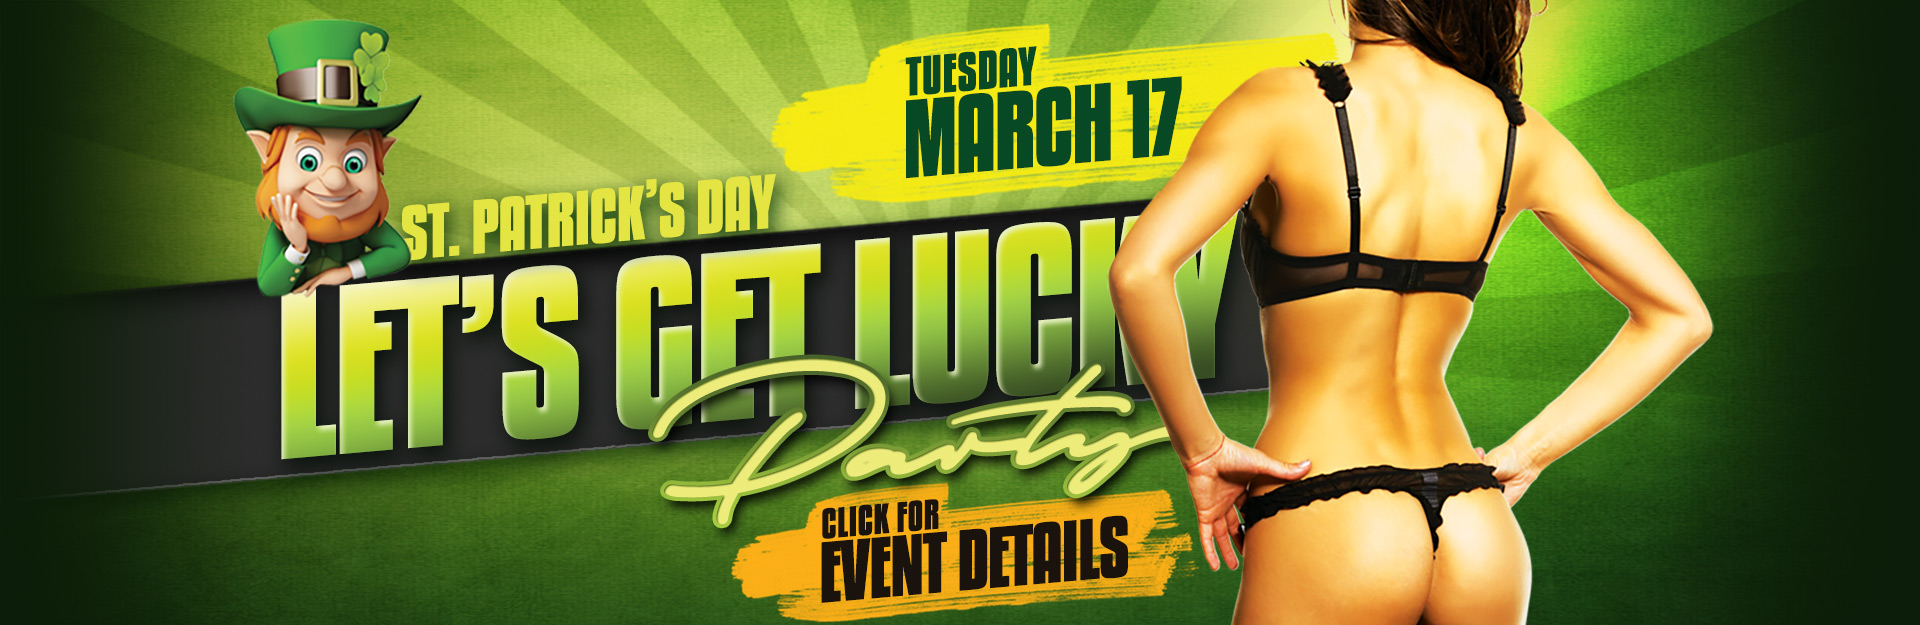 Let’s Get Lucky St. Patrick’s Day Party 2020